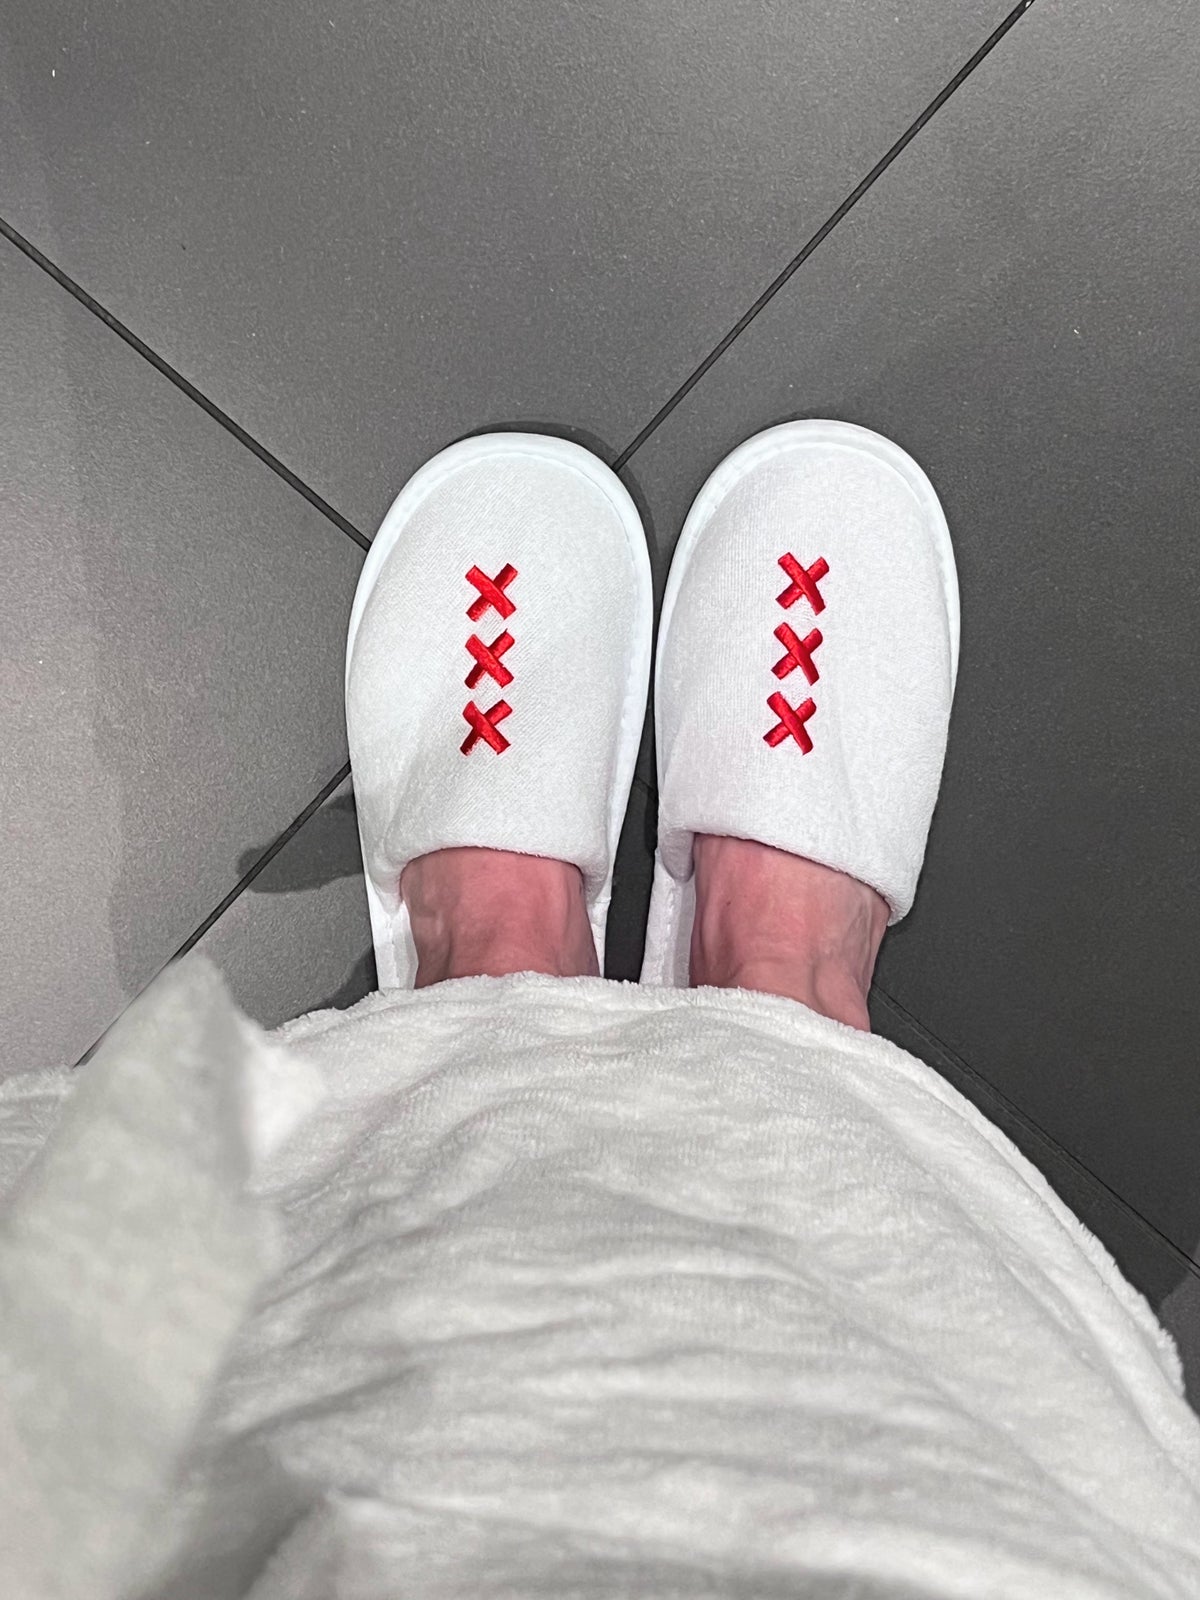 xxx slippers at Andaz Amsterdam